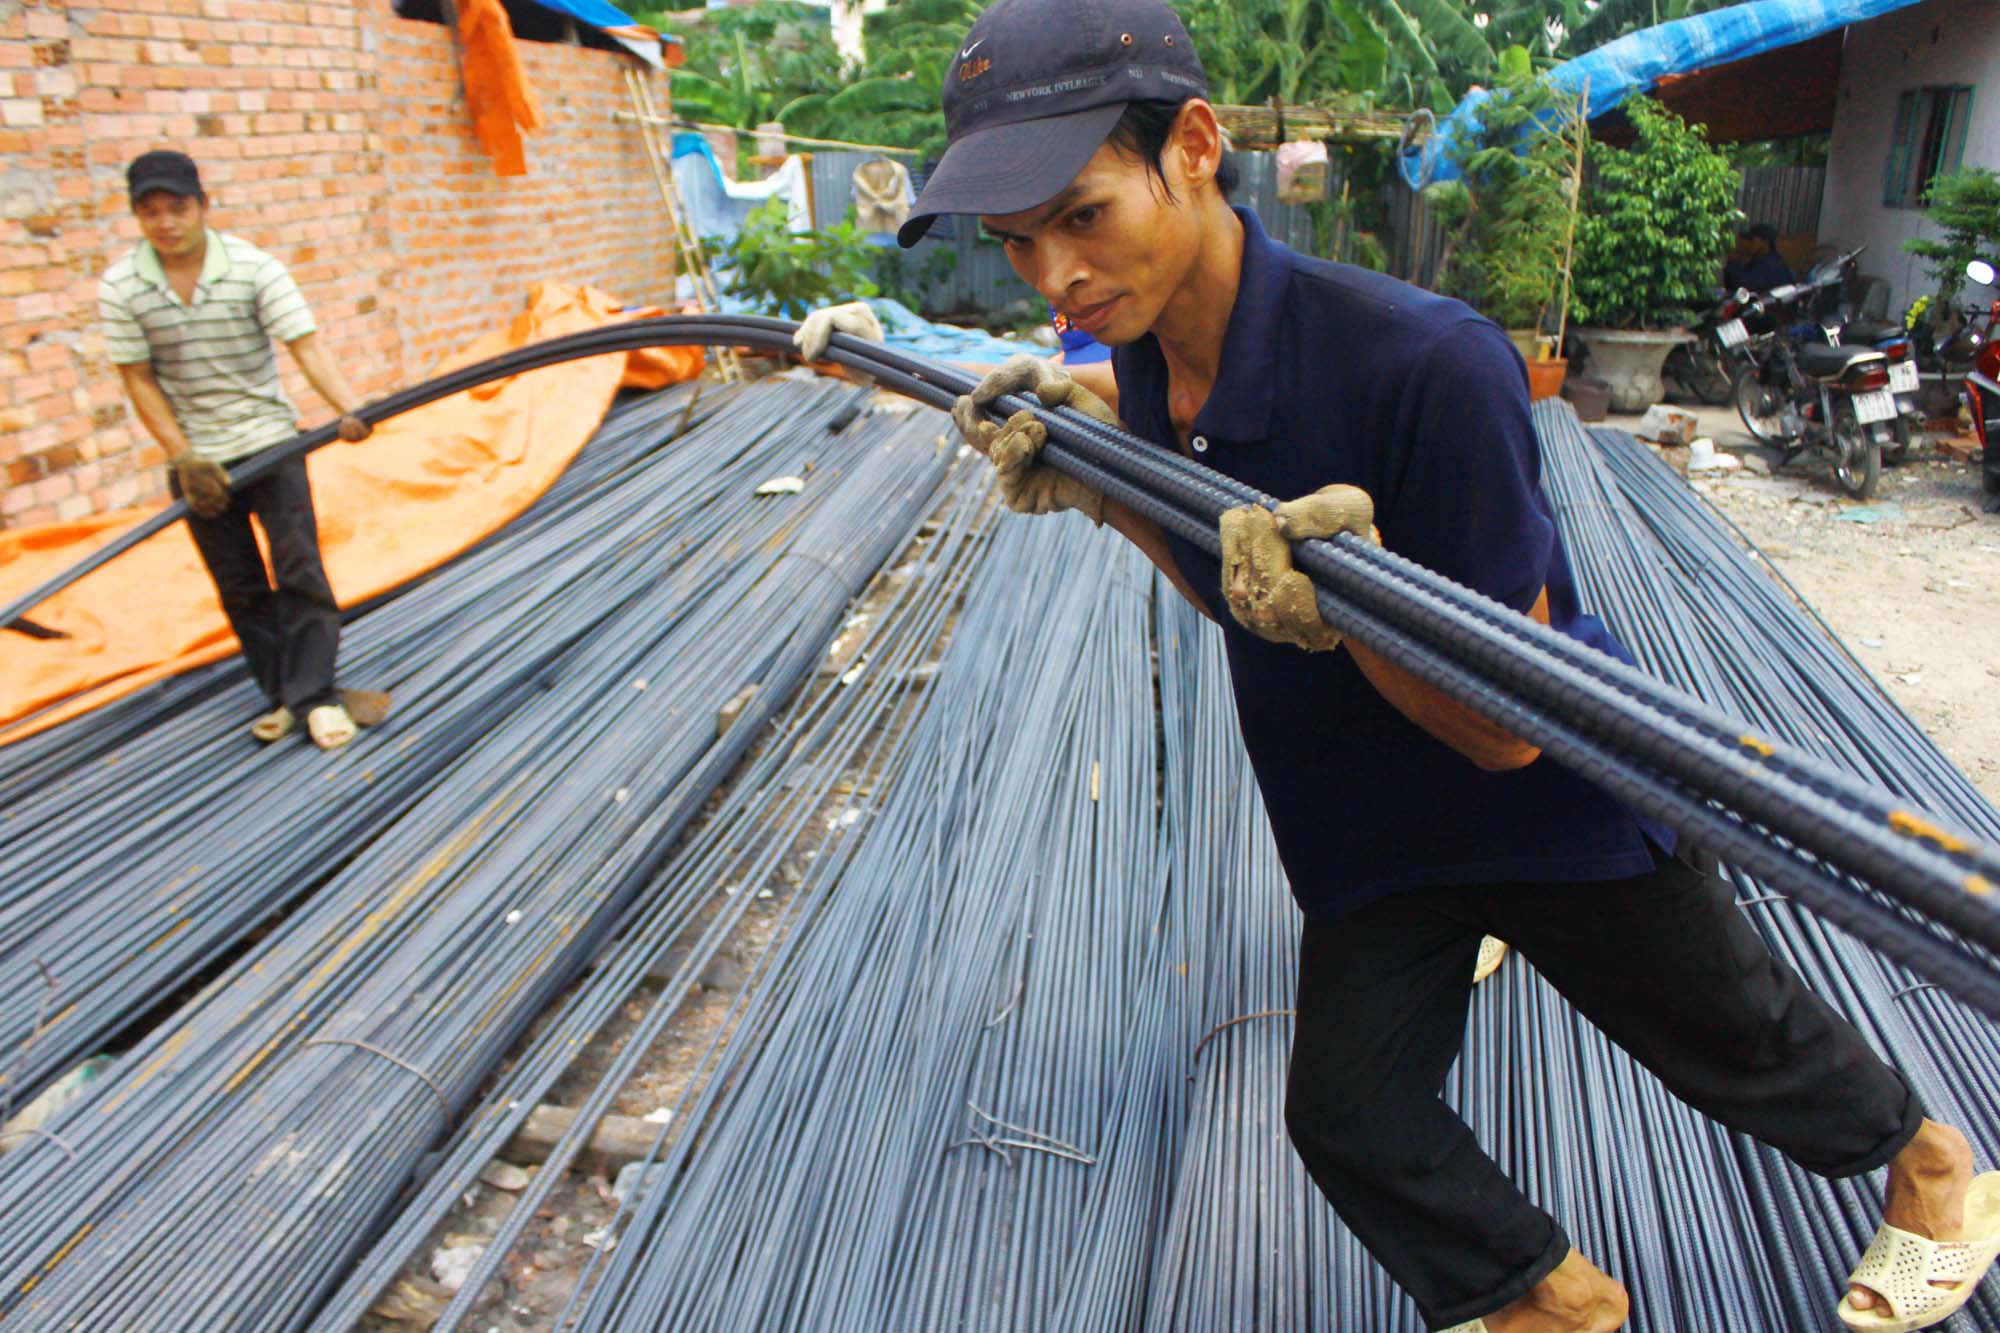 Vietnam levies anti-dumping duty on steel imports after lawsuits